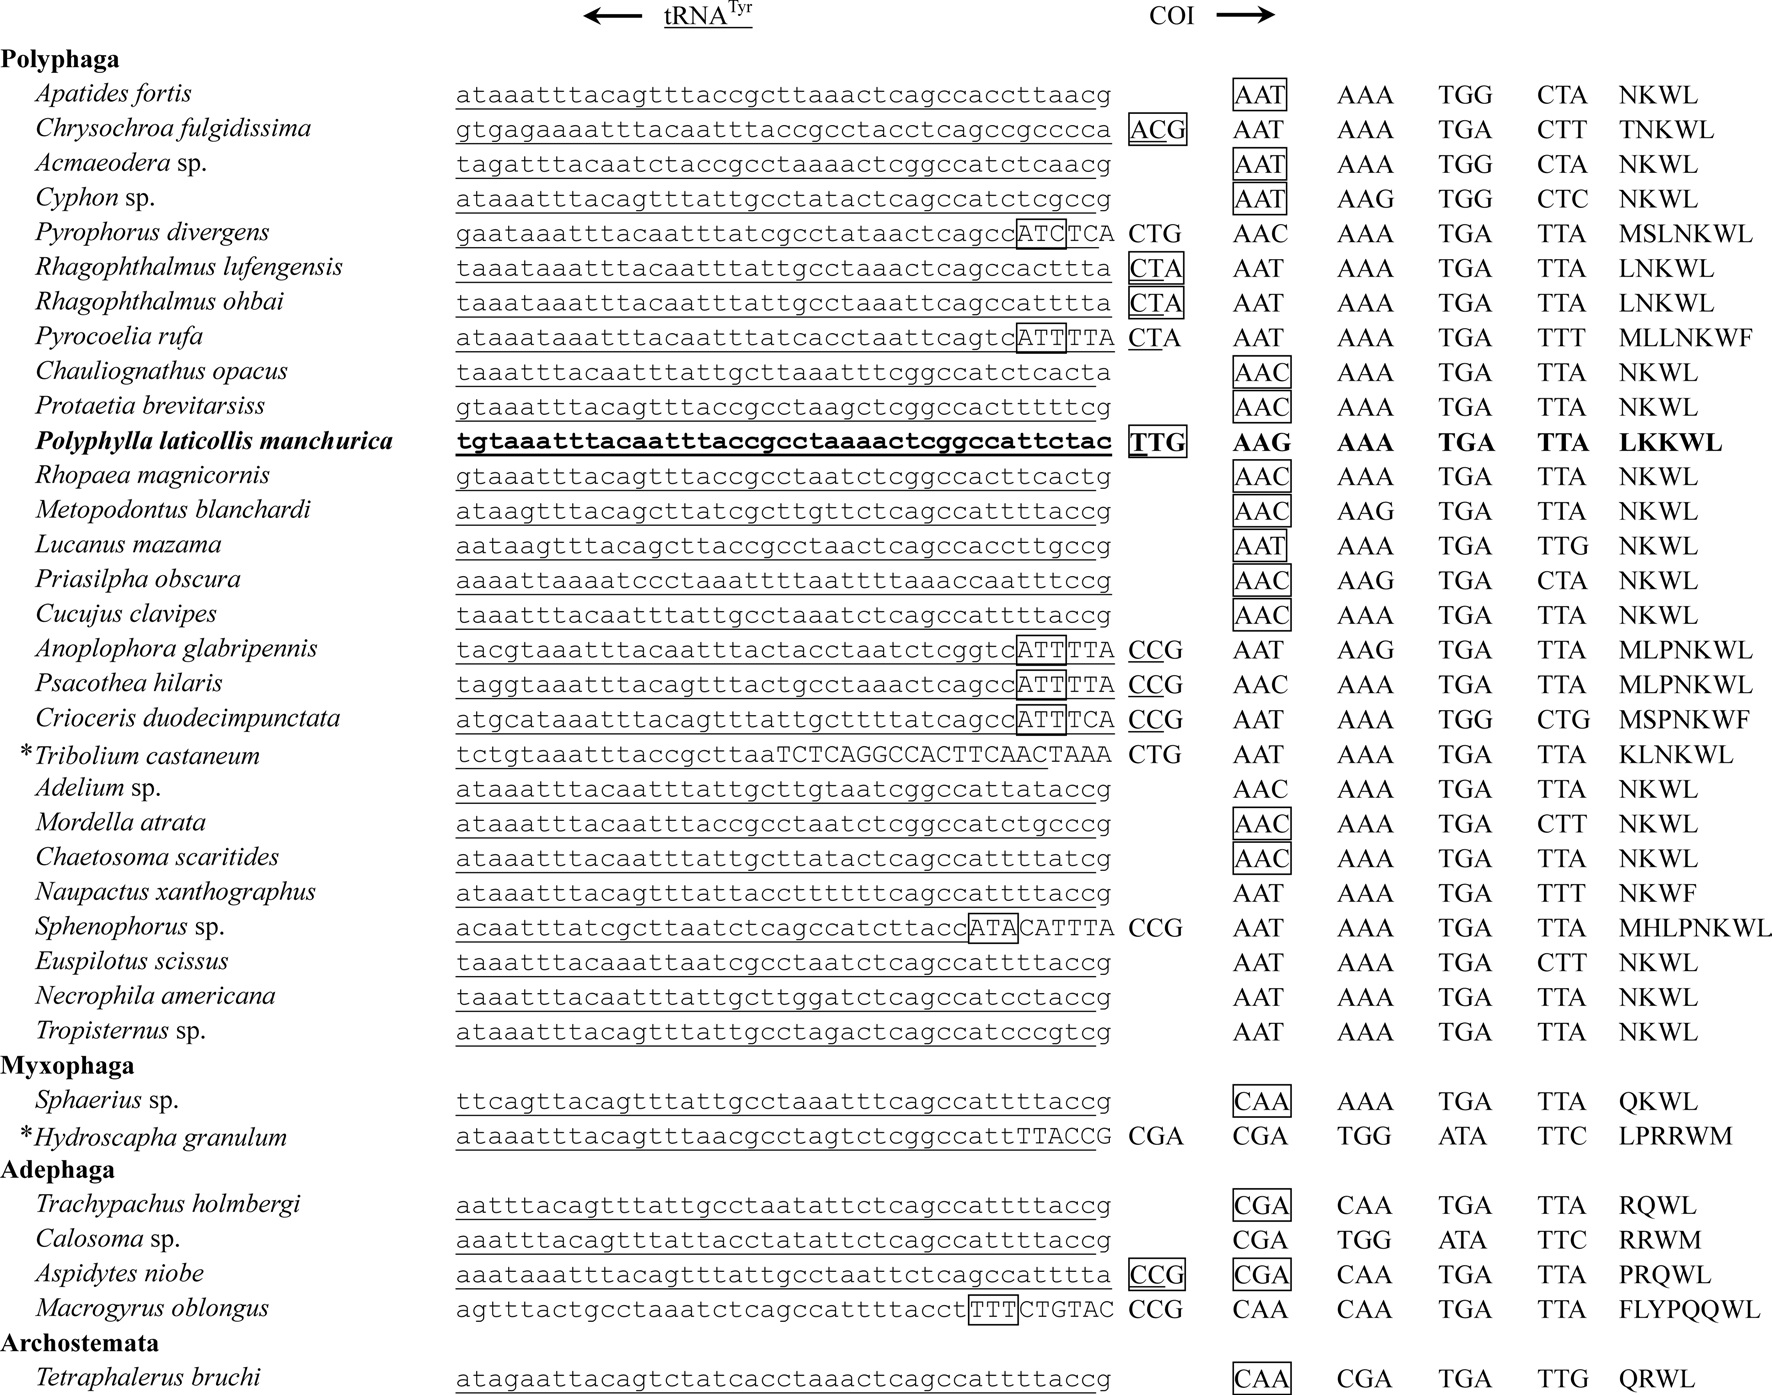 Alignment of the initiation context of COI genes of coleopteran insects including that of Polyphylla laticollis manchurica. The first
four to seven codons are shown in uppercase letters on the right-hand side of the figure. Underlined nucleotides indicate the adjacent partial
sequence of tRNATyr. Arrows indicate the direction of transcription. Boxed nucleotides indicate currently known translation initiators for the
COI of coleopteran. The start codon for P. l. manchurica was designated respectively as TTG.